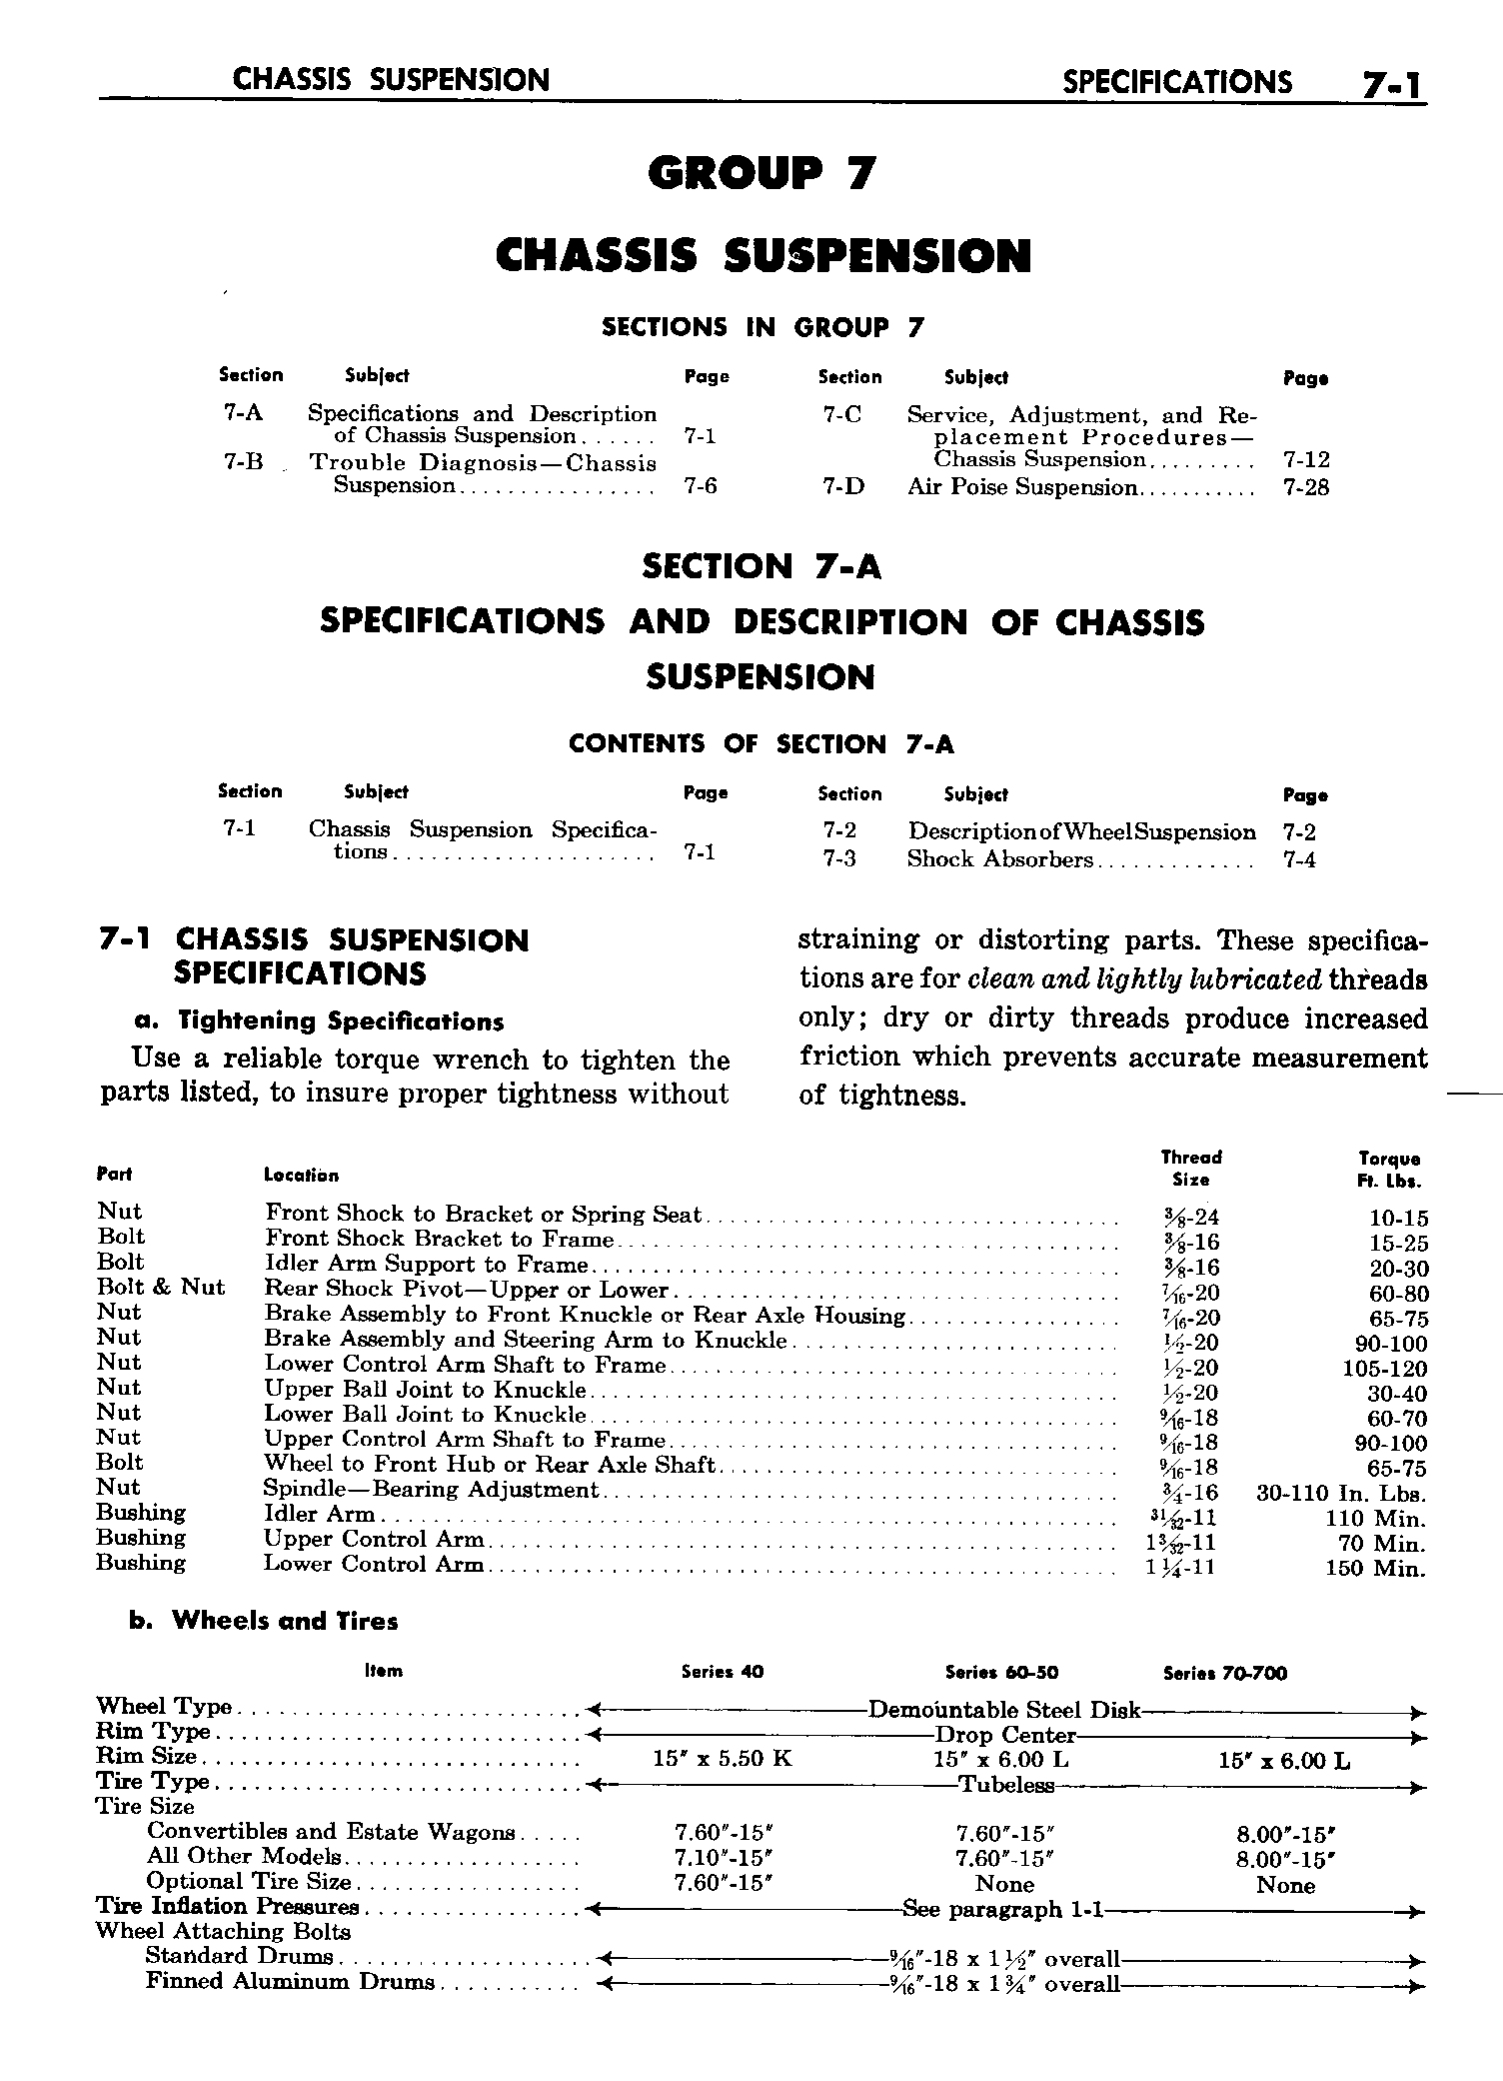 n_08 1958 Buick Shop Manual - Chassis Suspension_1.jpg